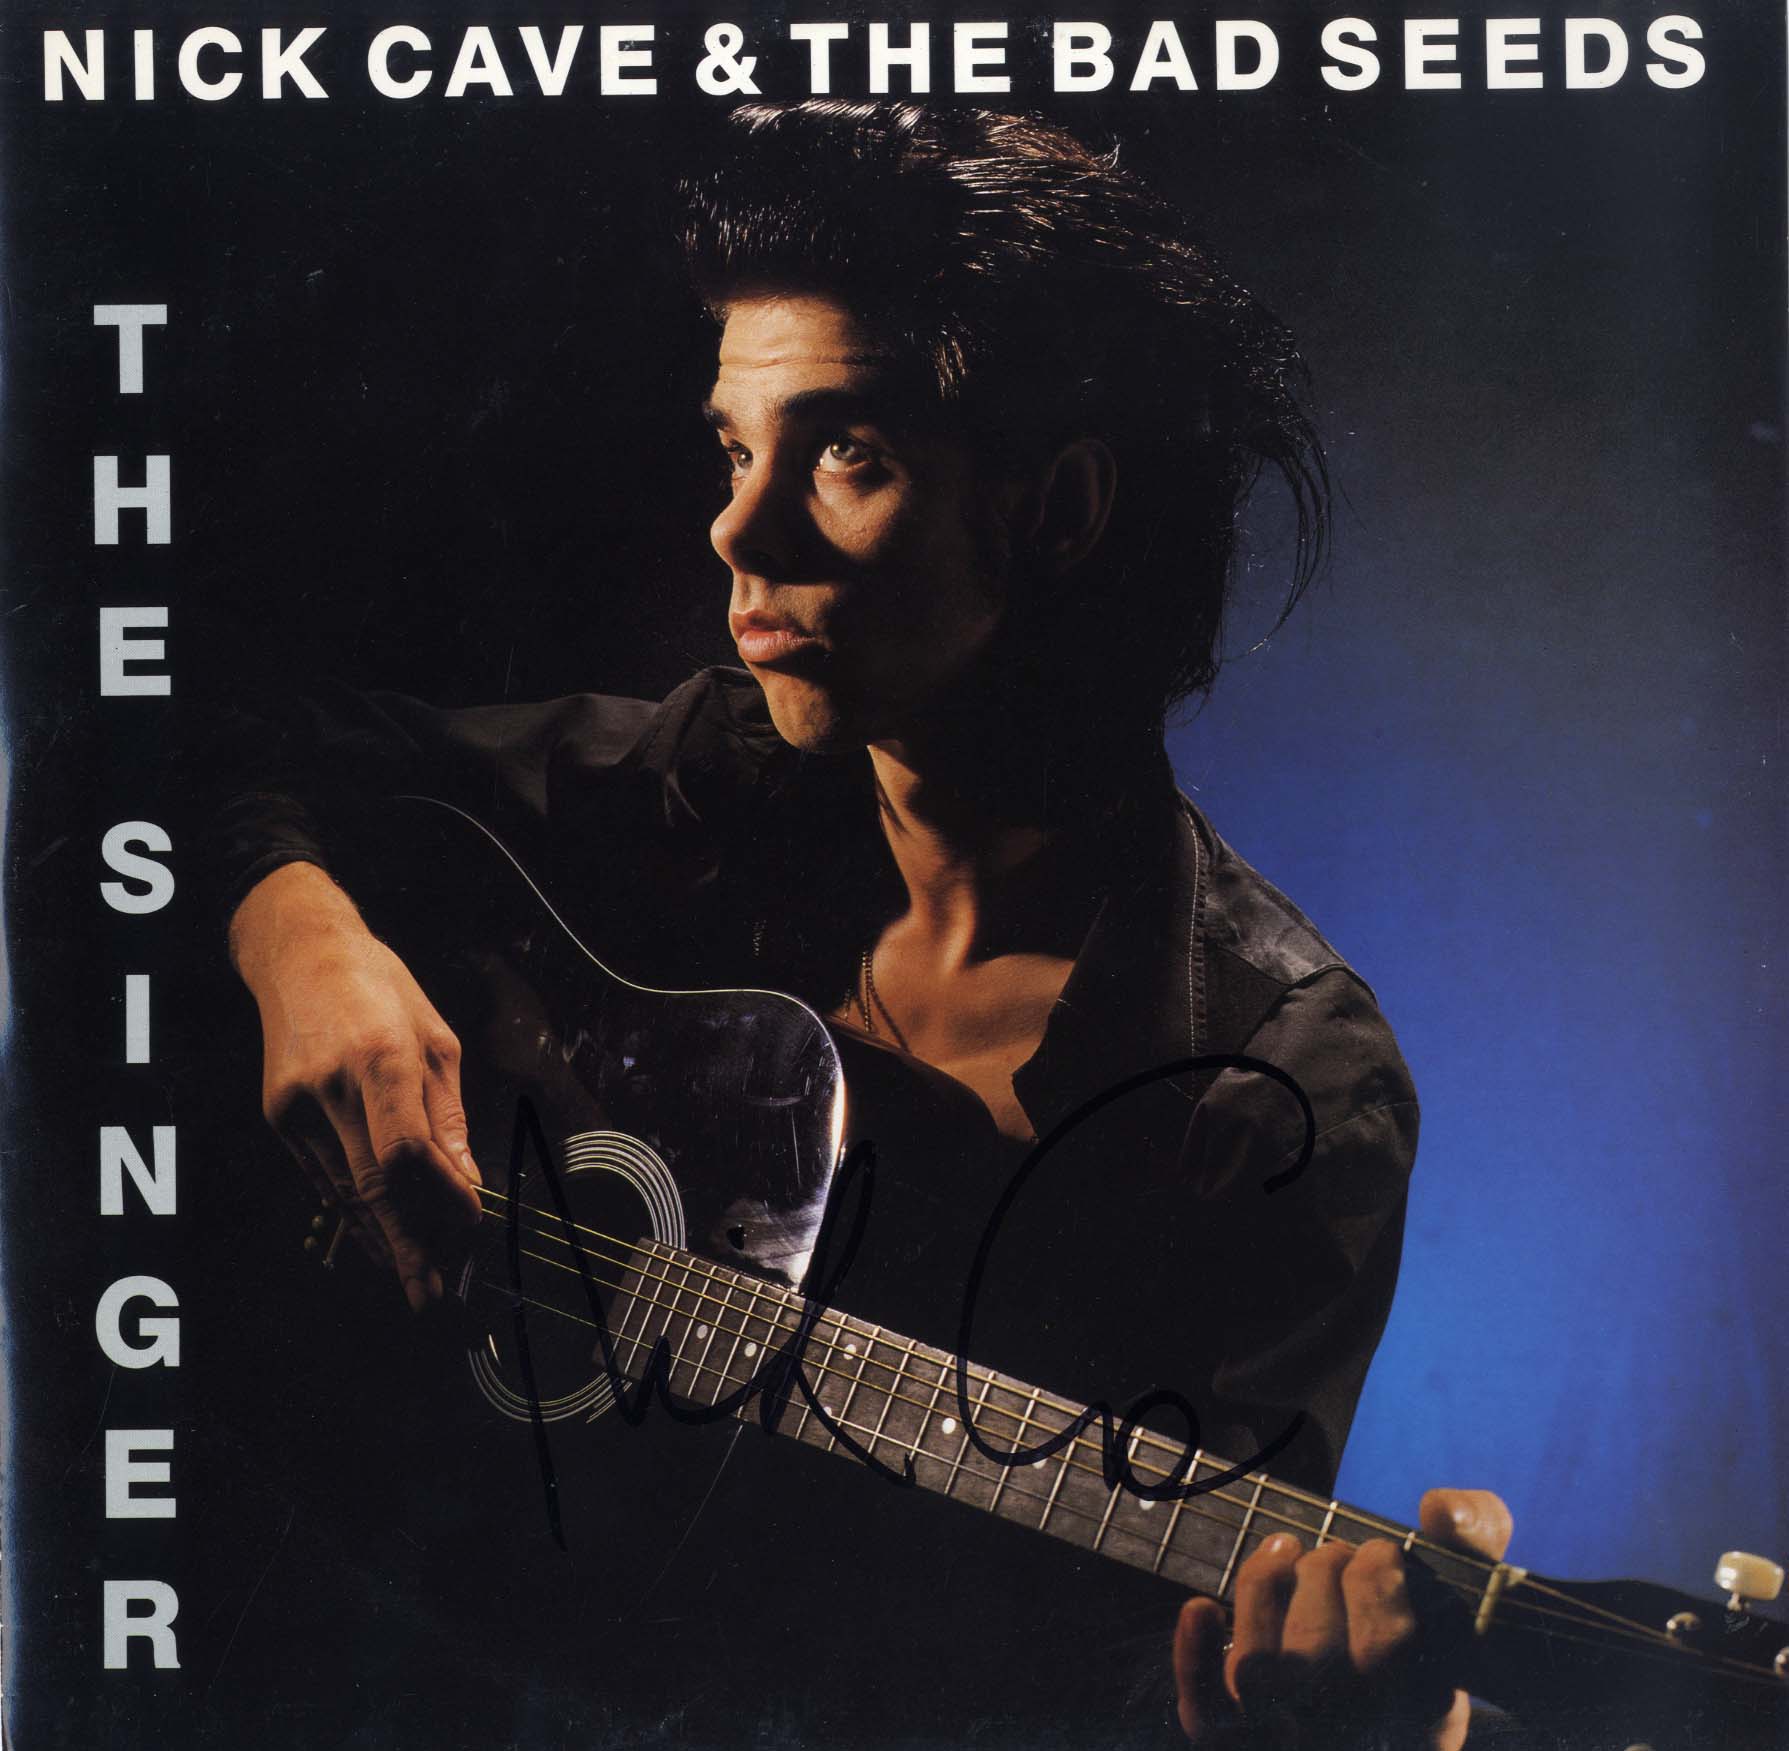 Nick Cave & The Bad Seeds Autograph